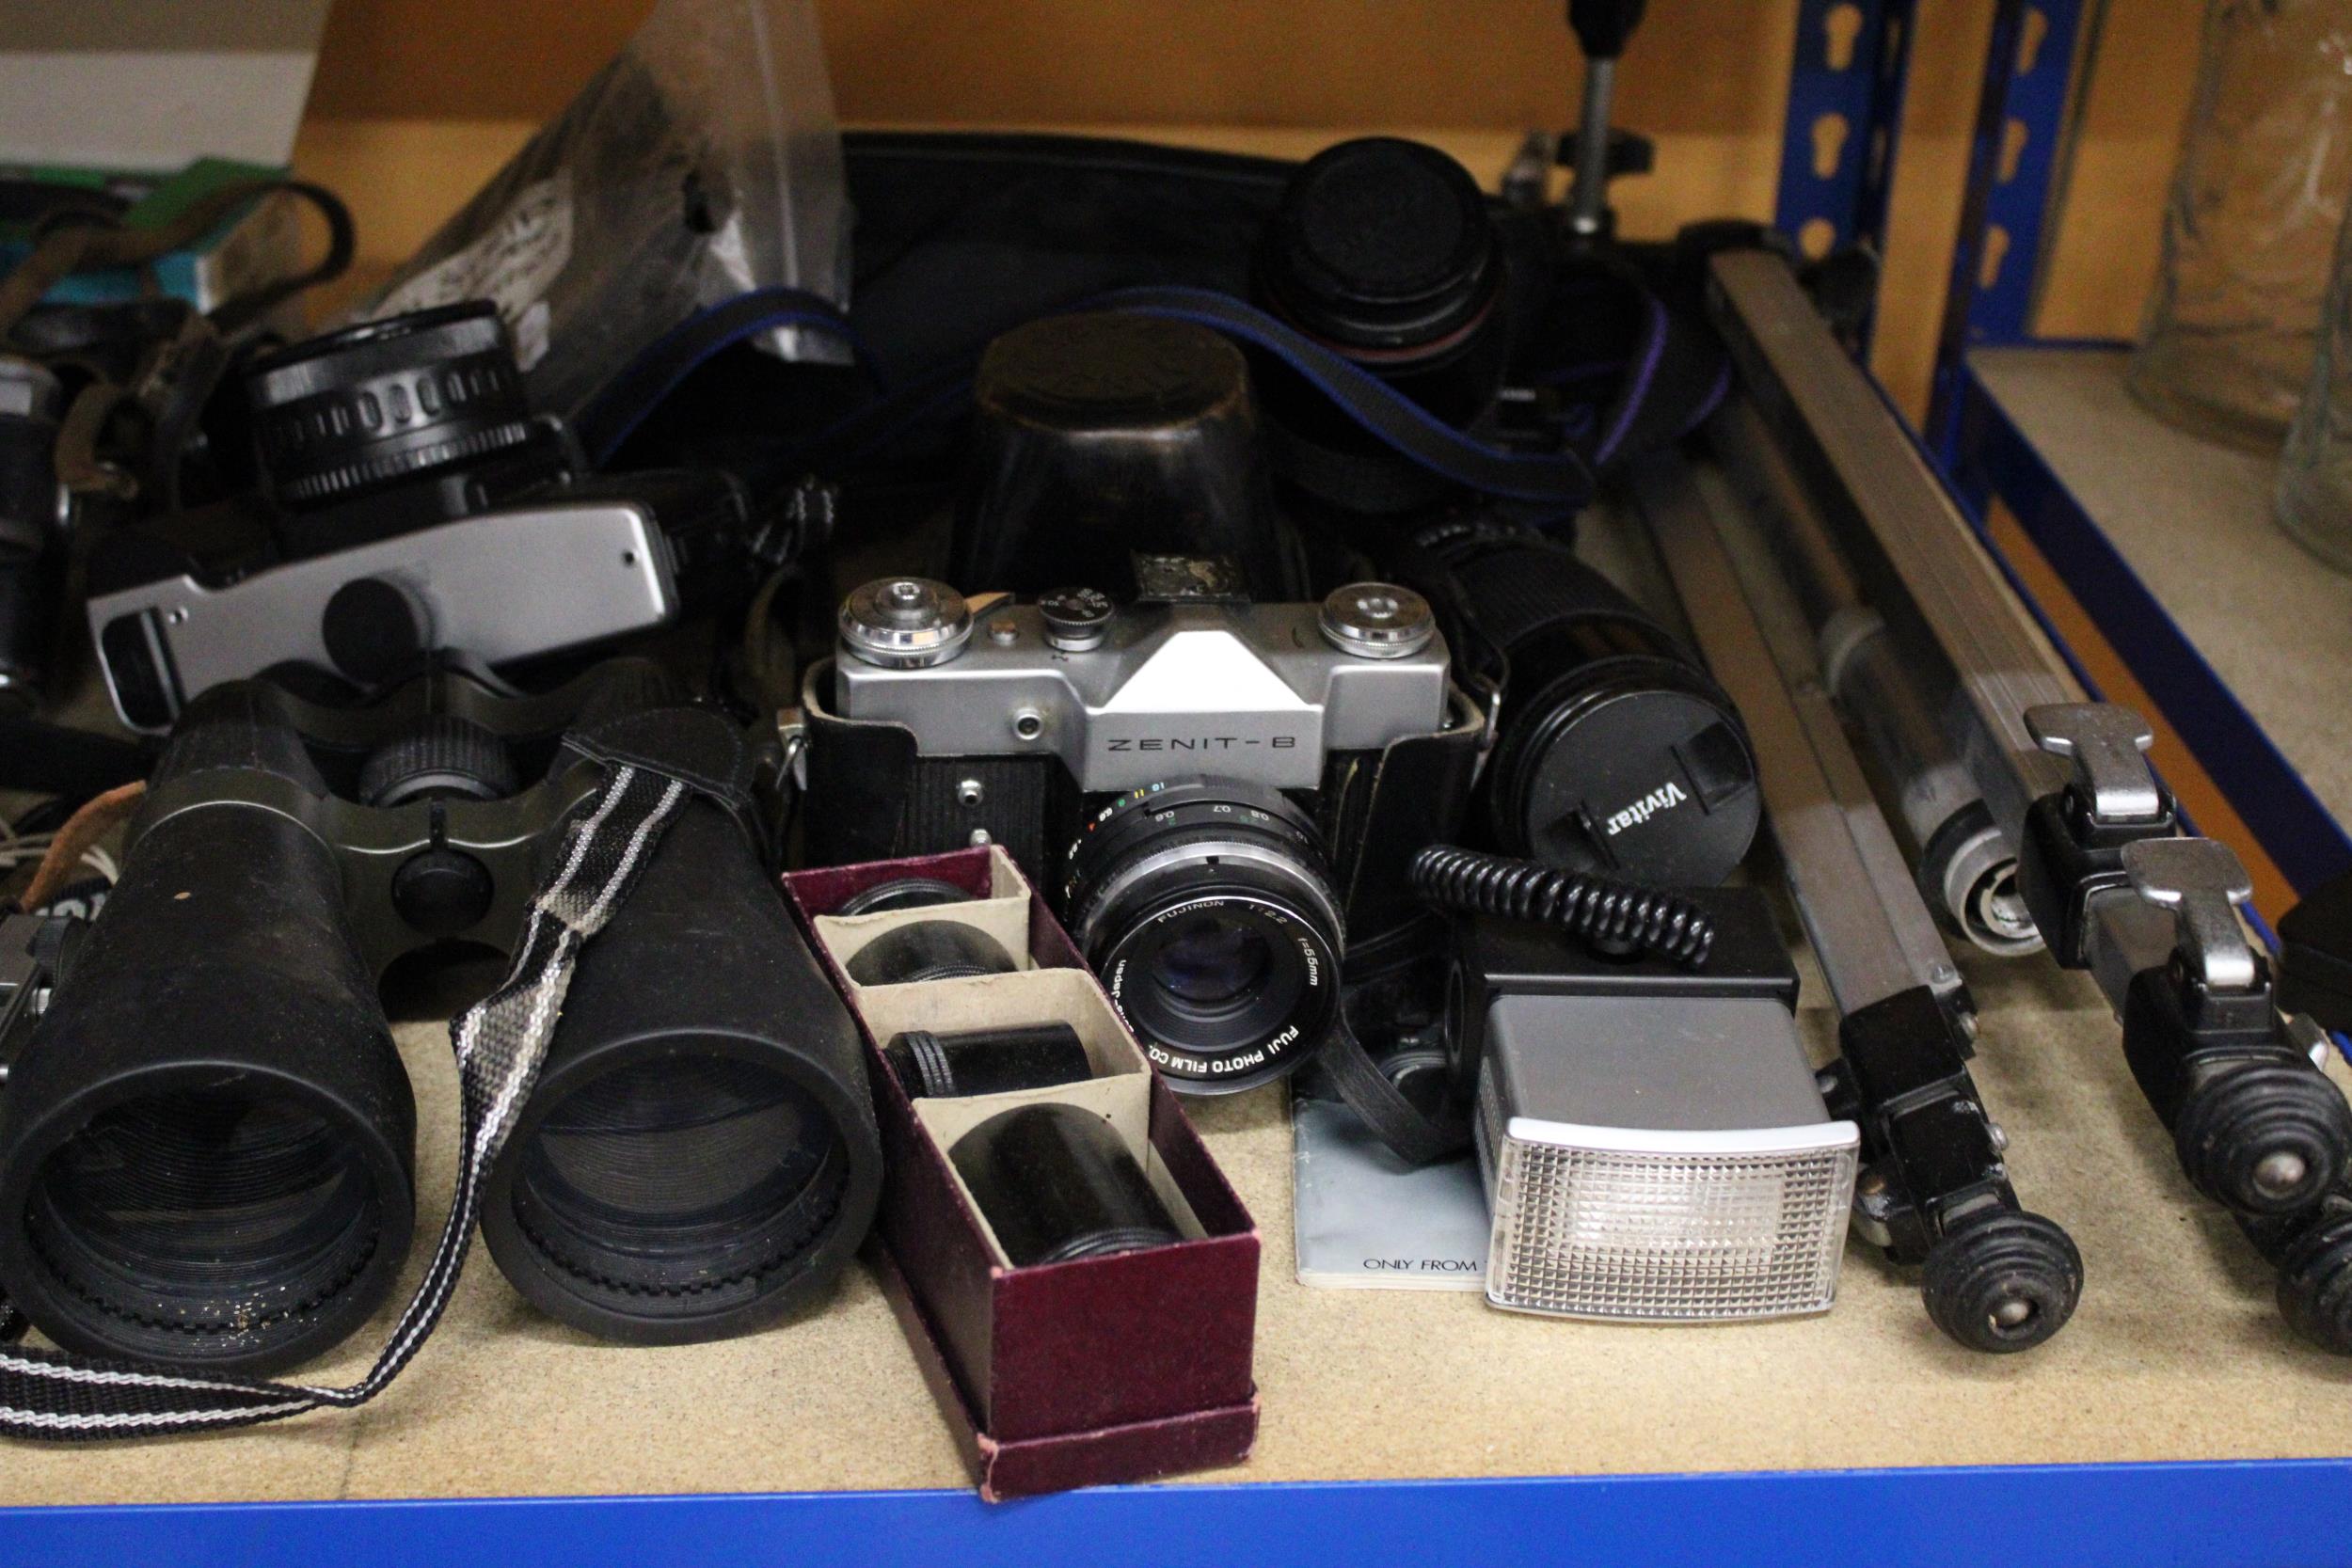 A LARGE QUANTITY OF CAMERAS AND ACCESSORIES TO INCLUDE YASHICA, MINOLTA, ZENIT-B ETC PLUS A - Image 4 of 7